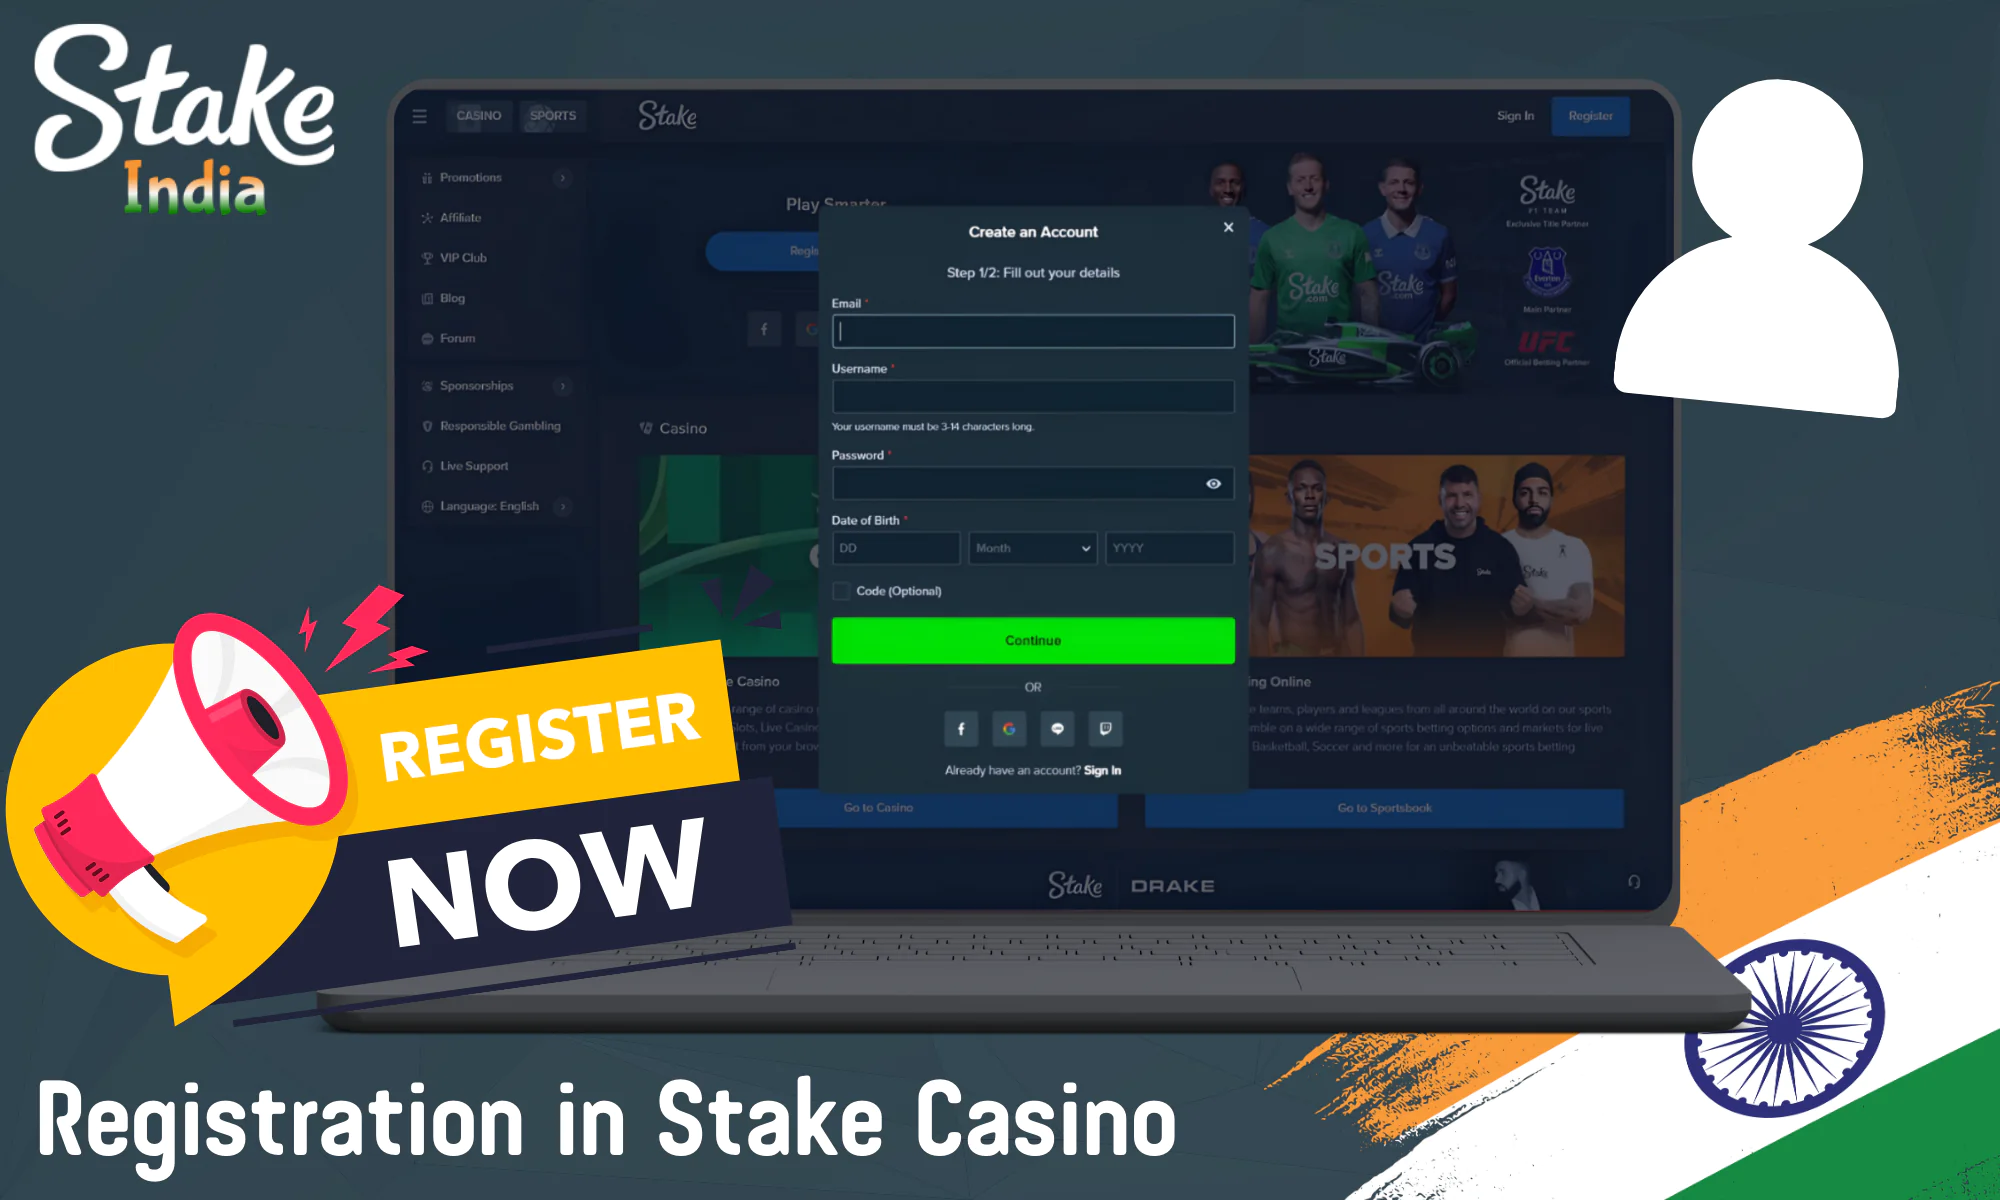 Detailed information about the registration procedure at Stake Casino